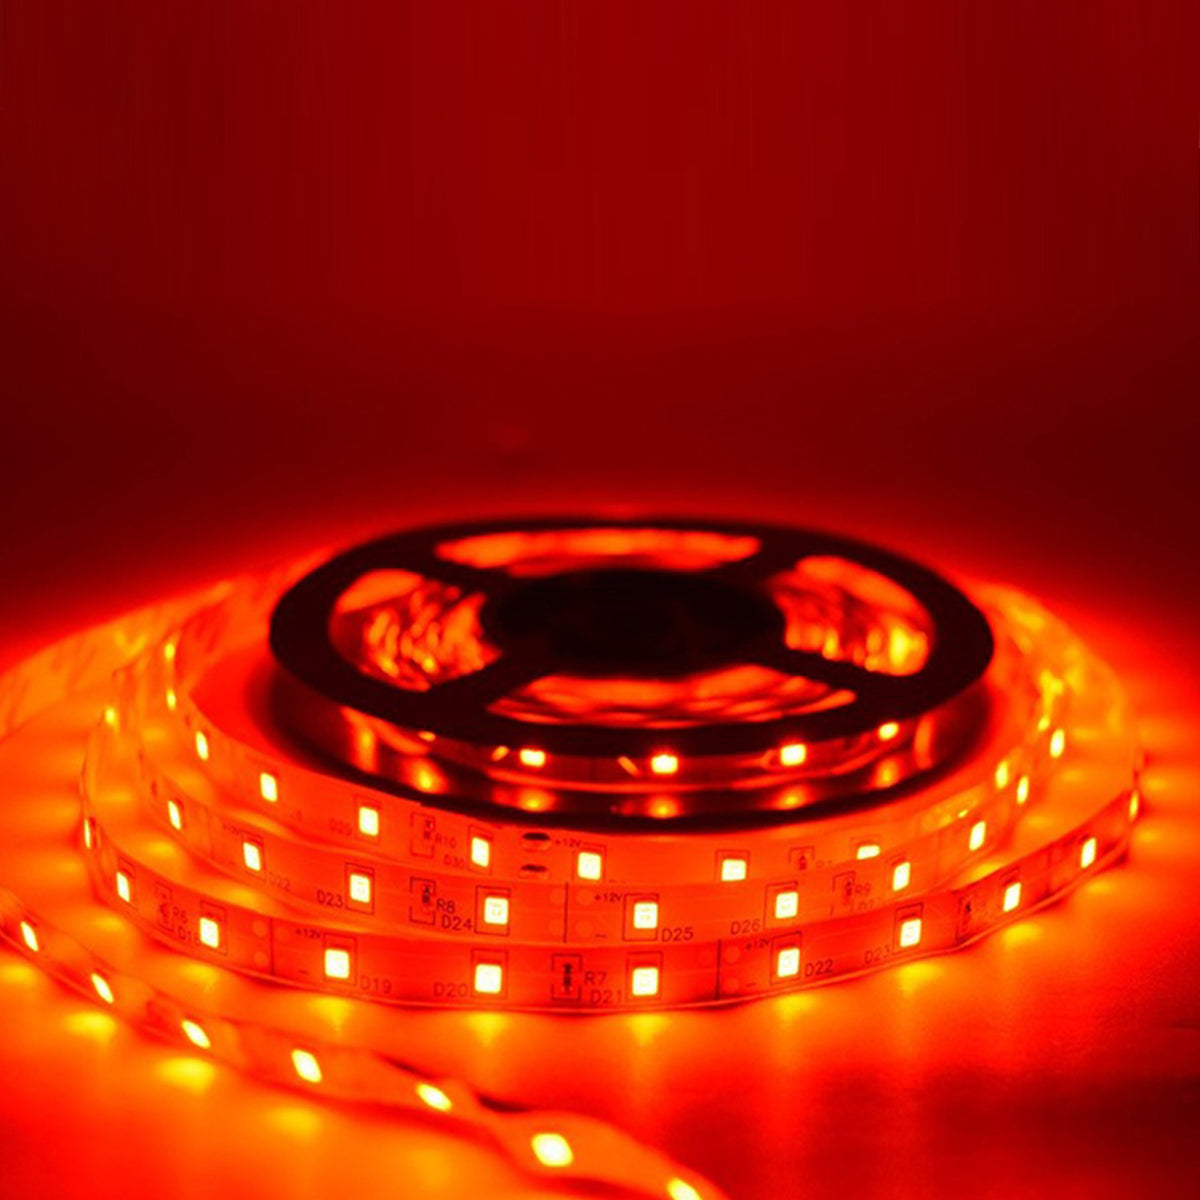 DecorTwist LEDs 5 m Strip Lights (Pack of 1) | Indoor & Outdoor Decorative | 120 LED/Mtr with Adaptor (Red)